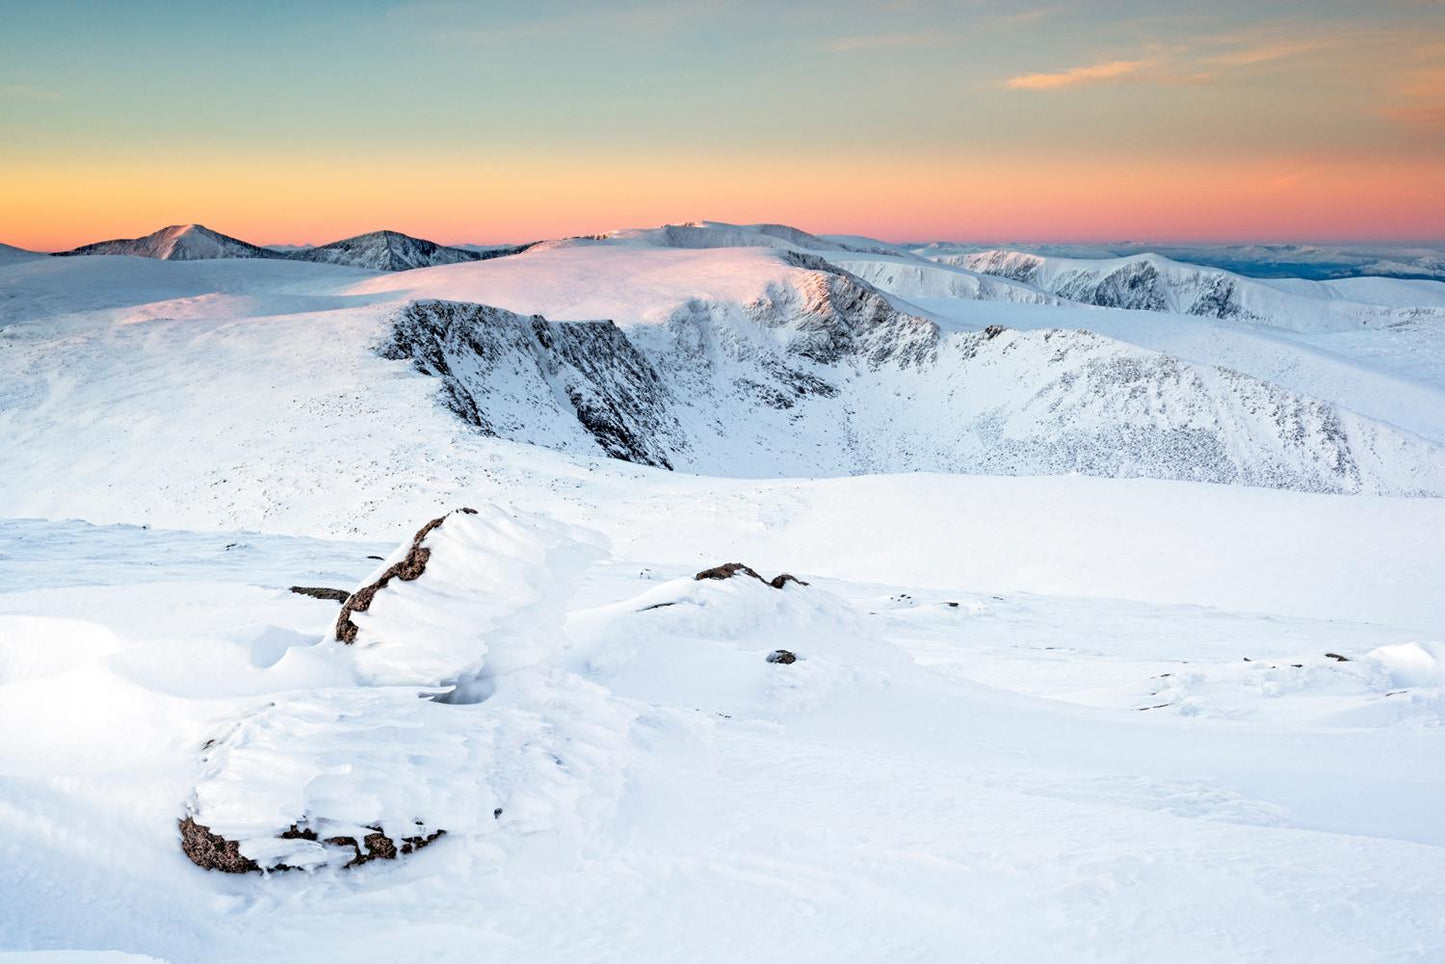 Northern Cairngorms | Ed Smith